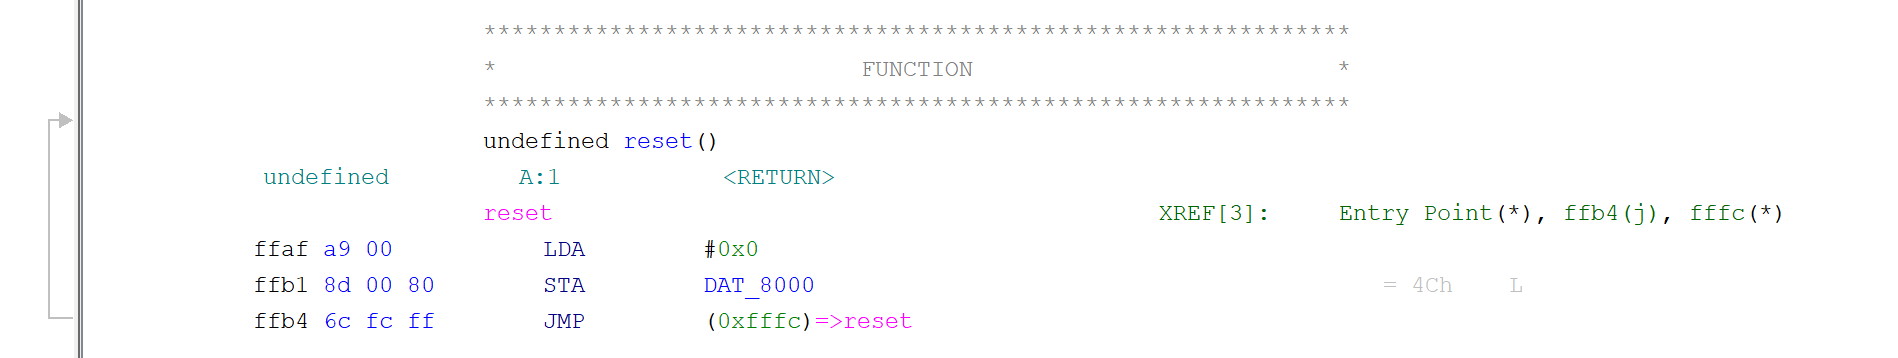 Ghidra disassembly showing a "reset" function consisting of "LDA #0x0", "STA DAT_8000", and "JMP (0xfffc)=>reset". The gutter shows this function as an infinite loop